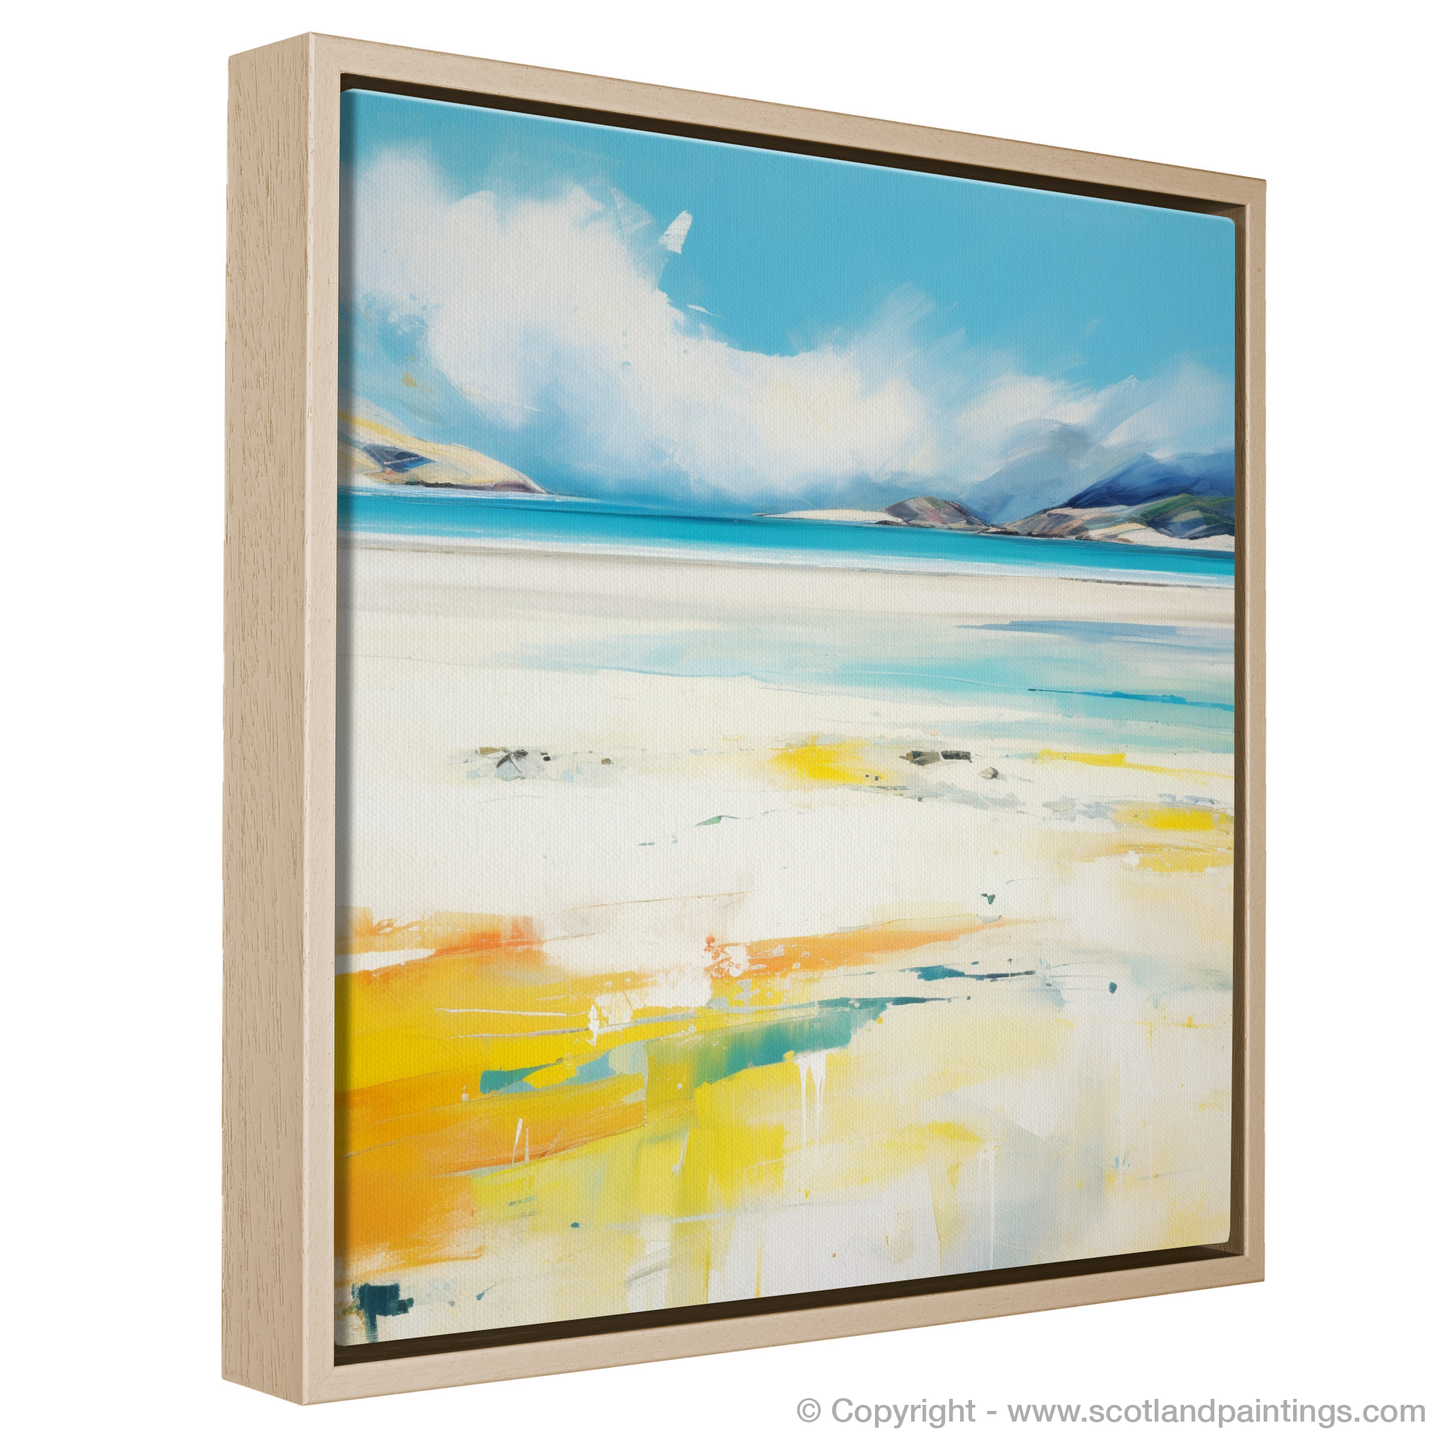 Painting and Art Print of Luskentyre Beach, Isle of Harris in summer entitled "Luskentyre Beach Bliss: An Abstract Ode to Summer".